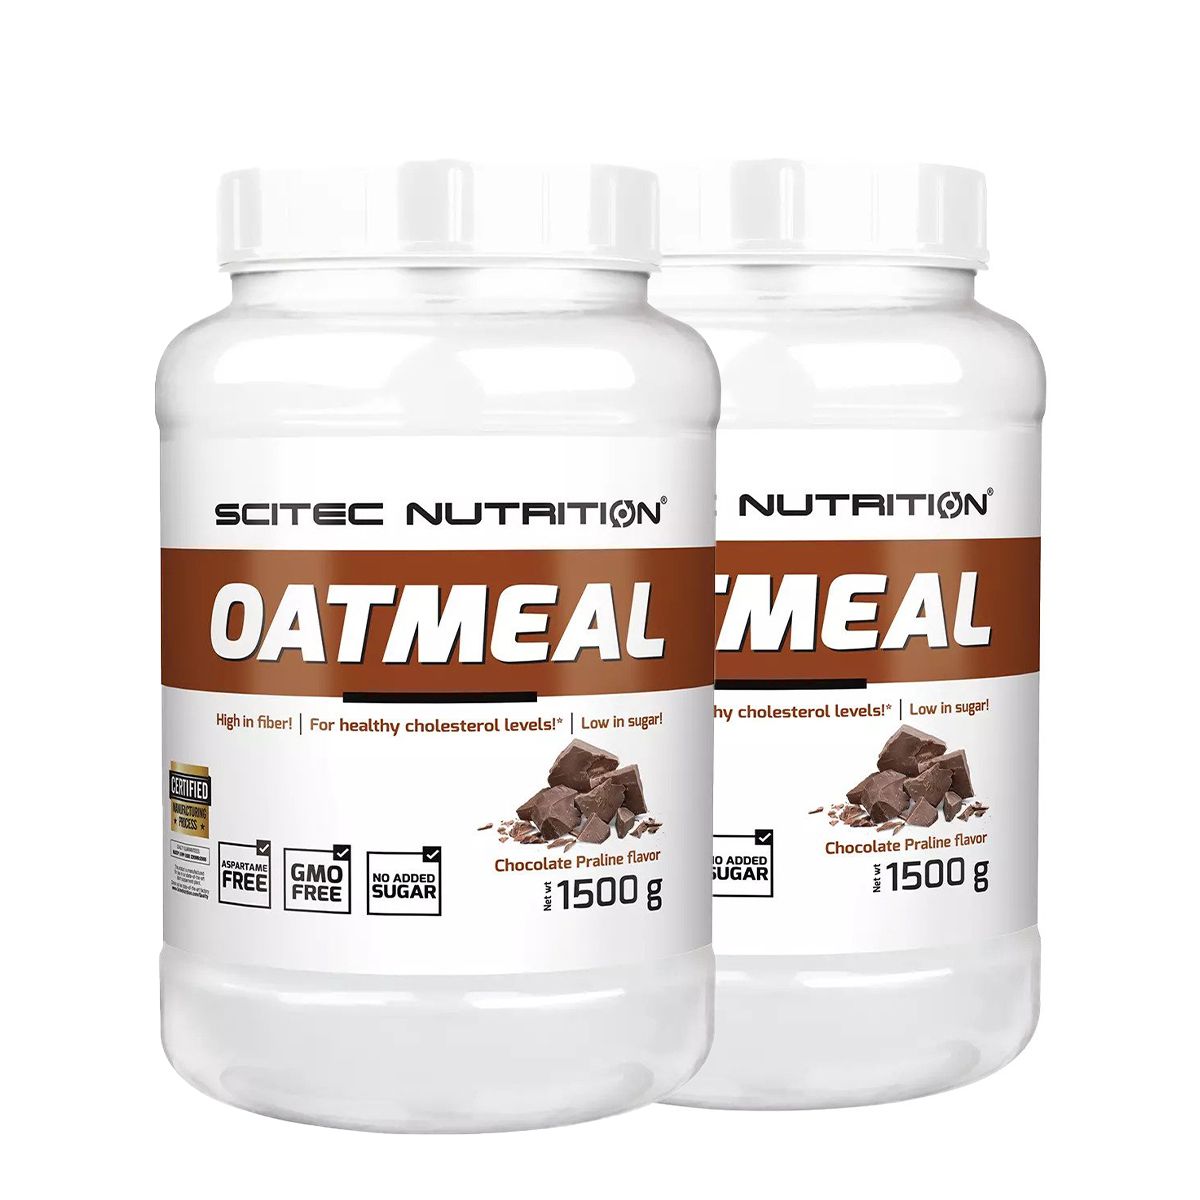 SCITEC NUTRITION - OATMEAL - 2 x 1500 G